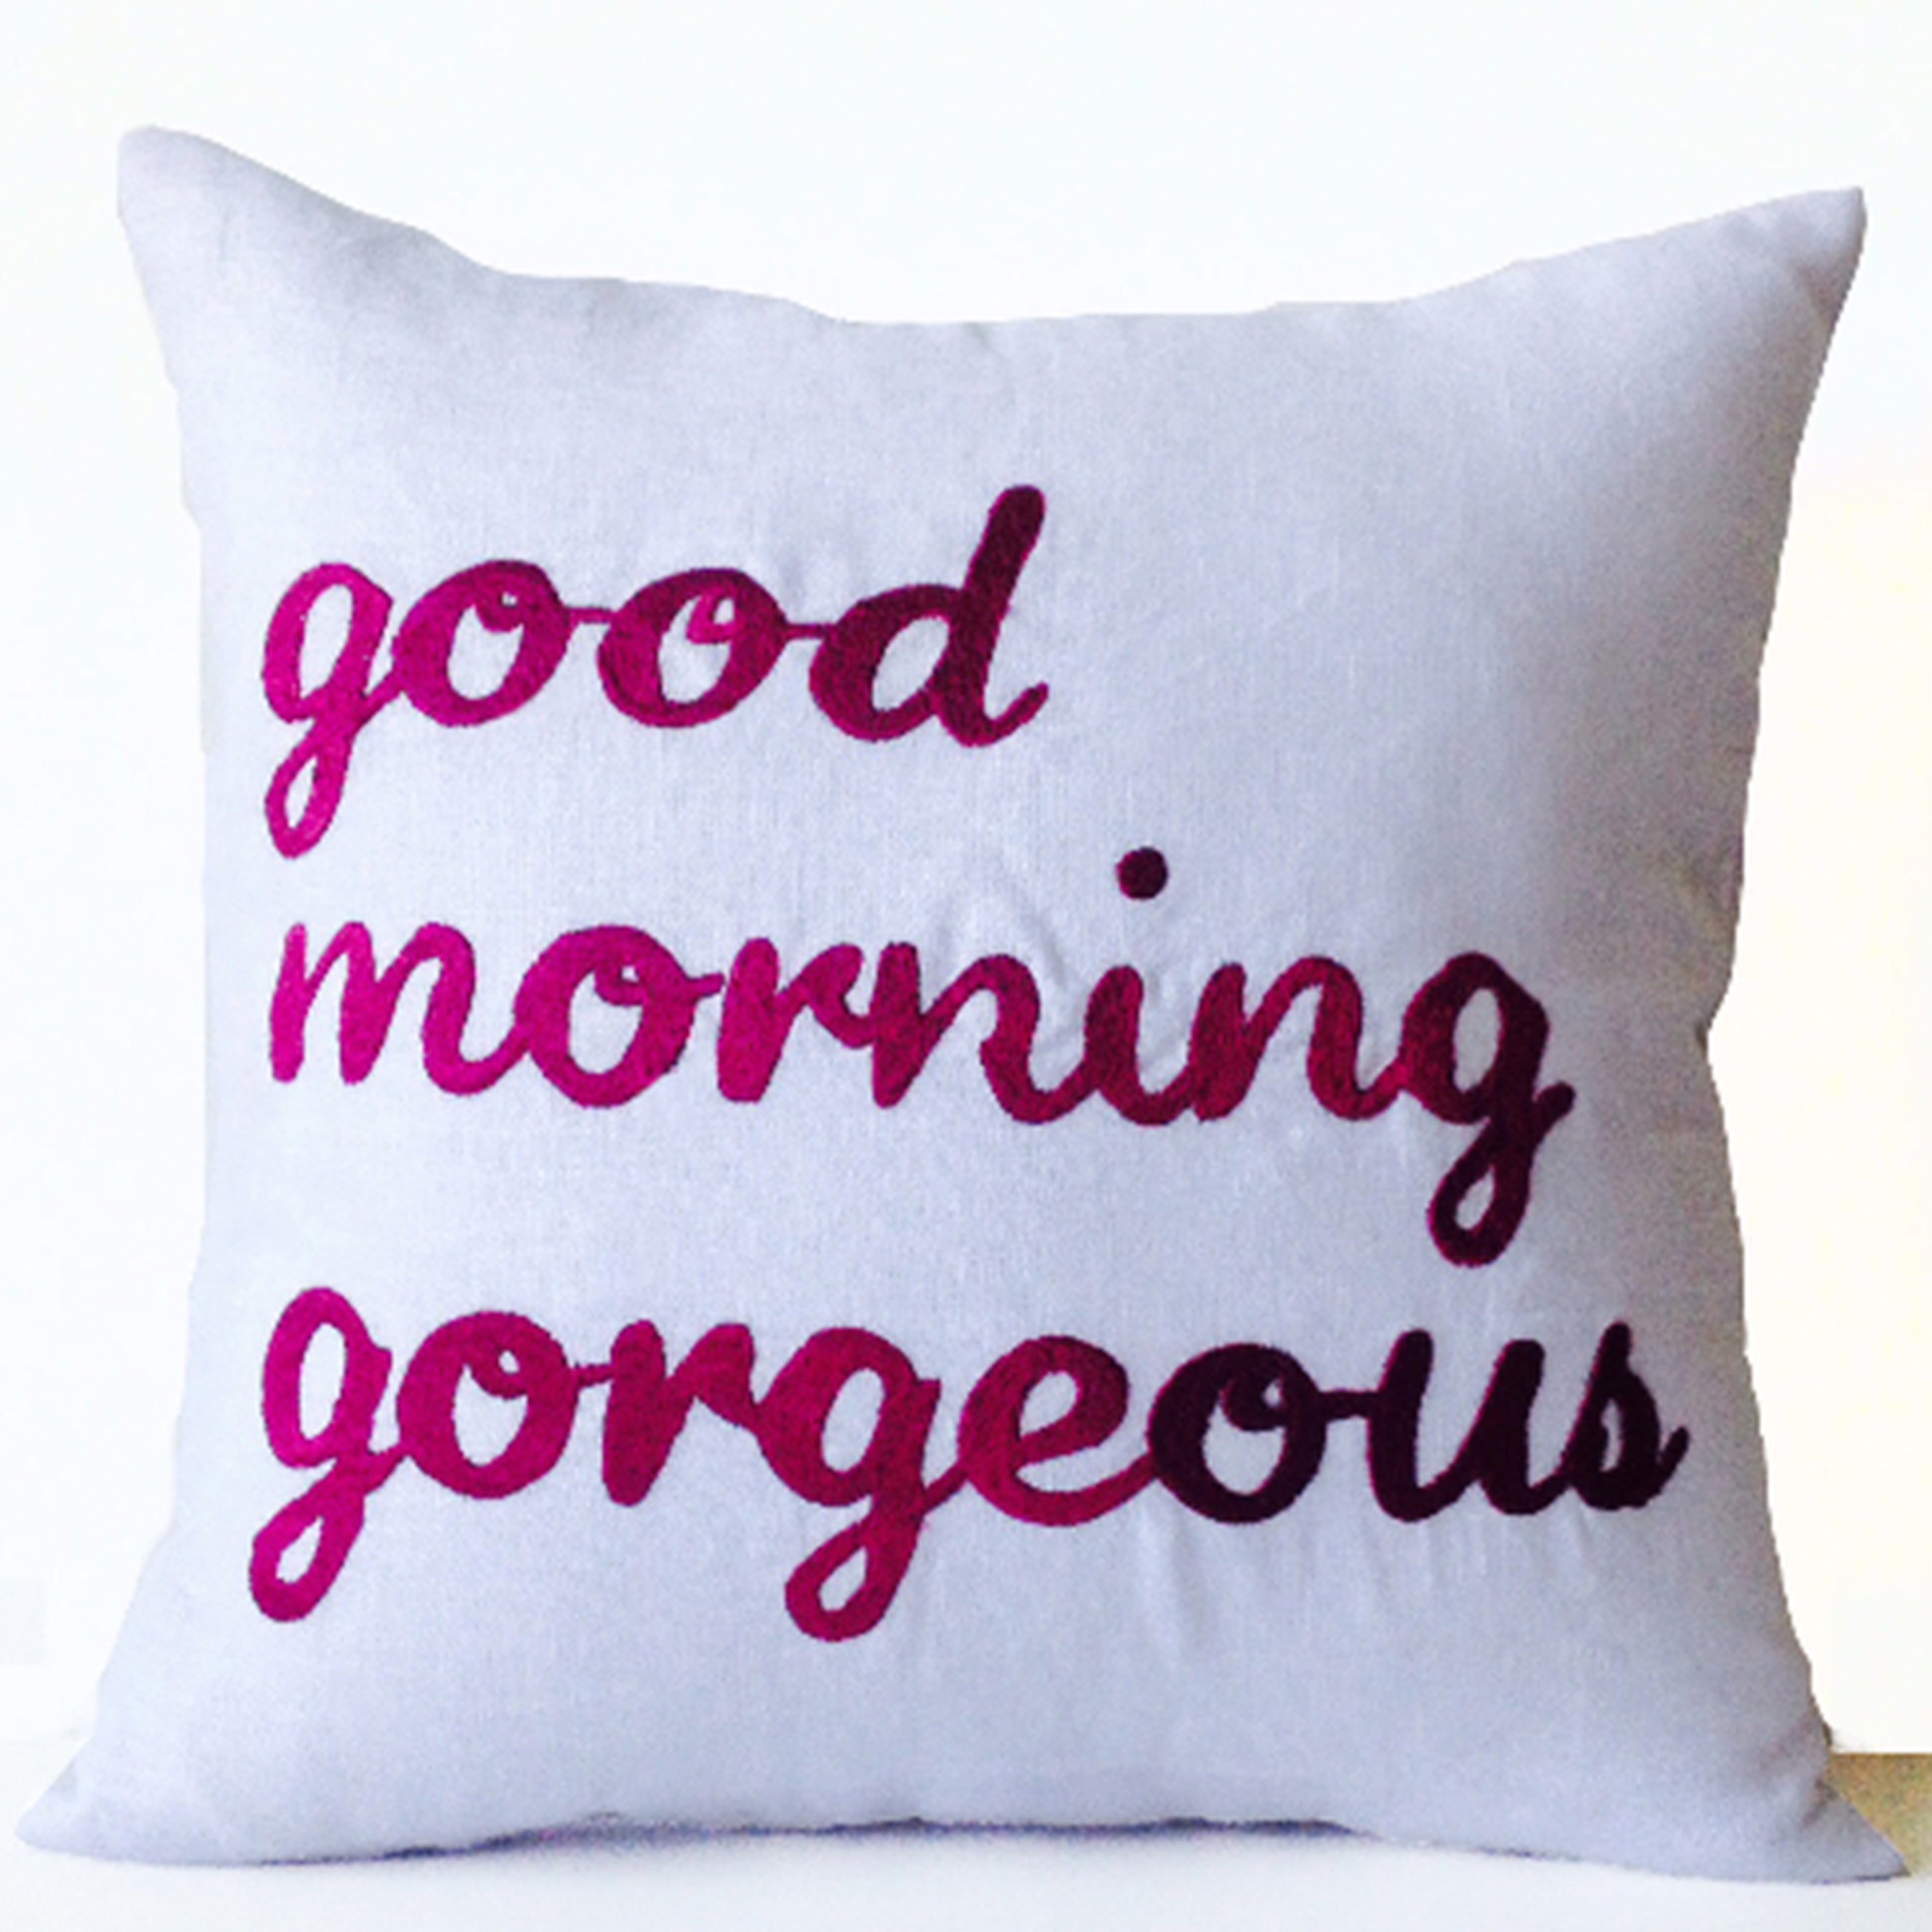 Couple Pillow Cover Good Morning Gorgeous Hello There Handsome Wedding Pillows Anniversary Housewarming